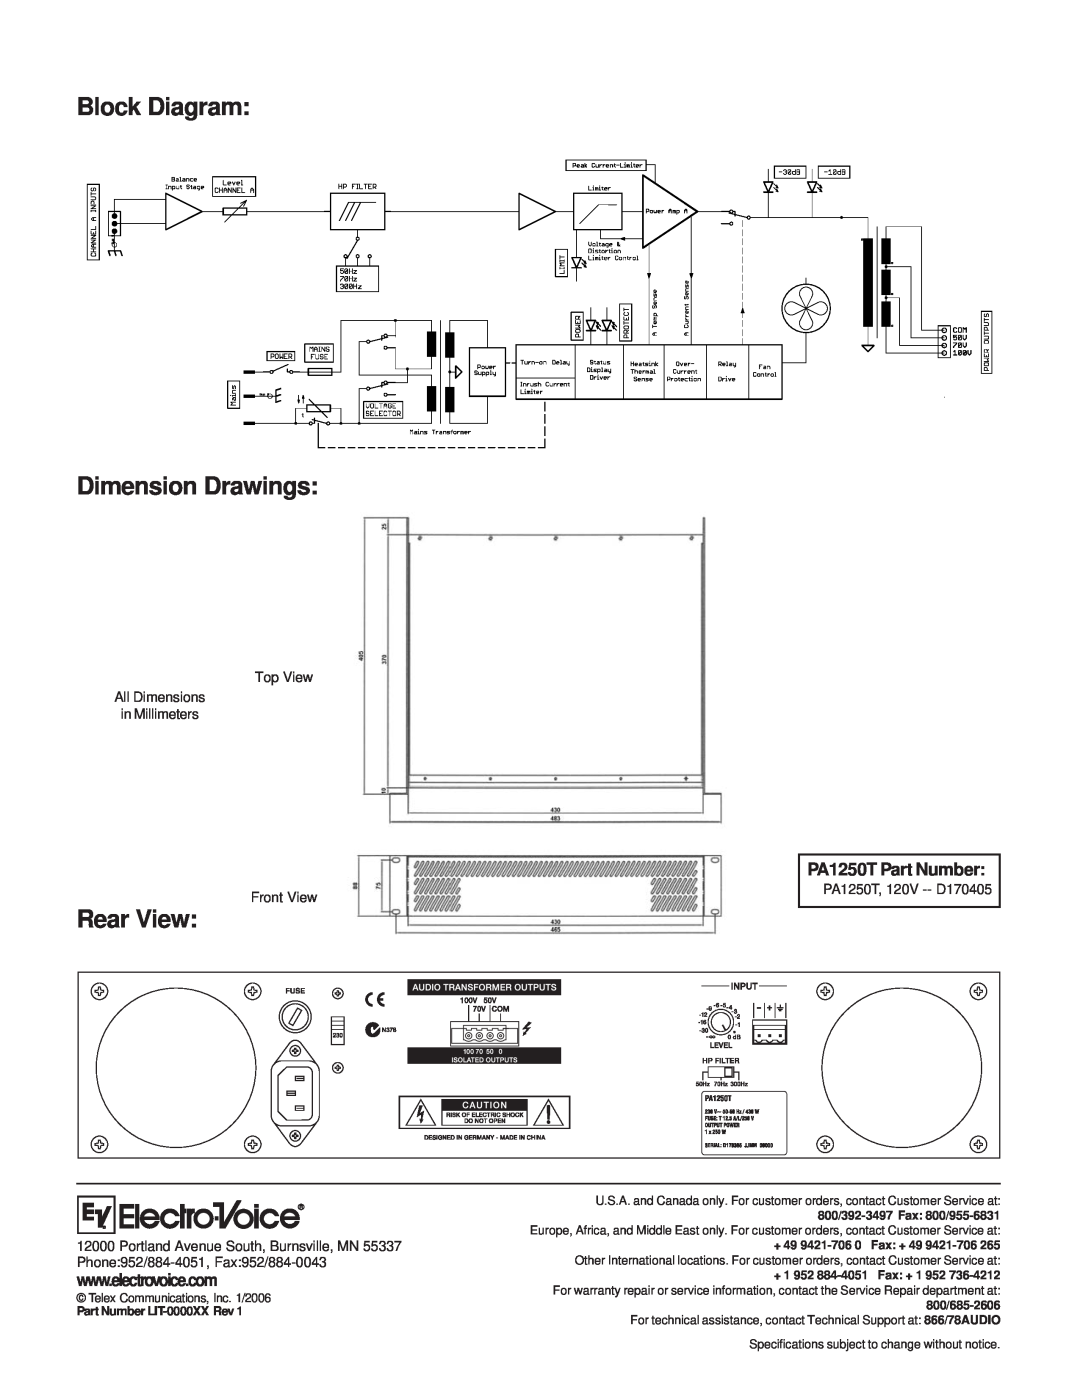 Electro-Voice Block Diagram Dimension Drawings, Rear View, PA1250T Part Number, Telex Communications, Inc. 1/2006 